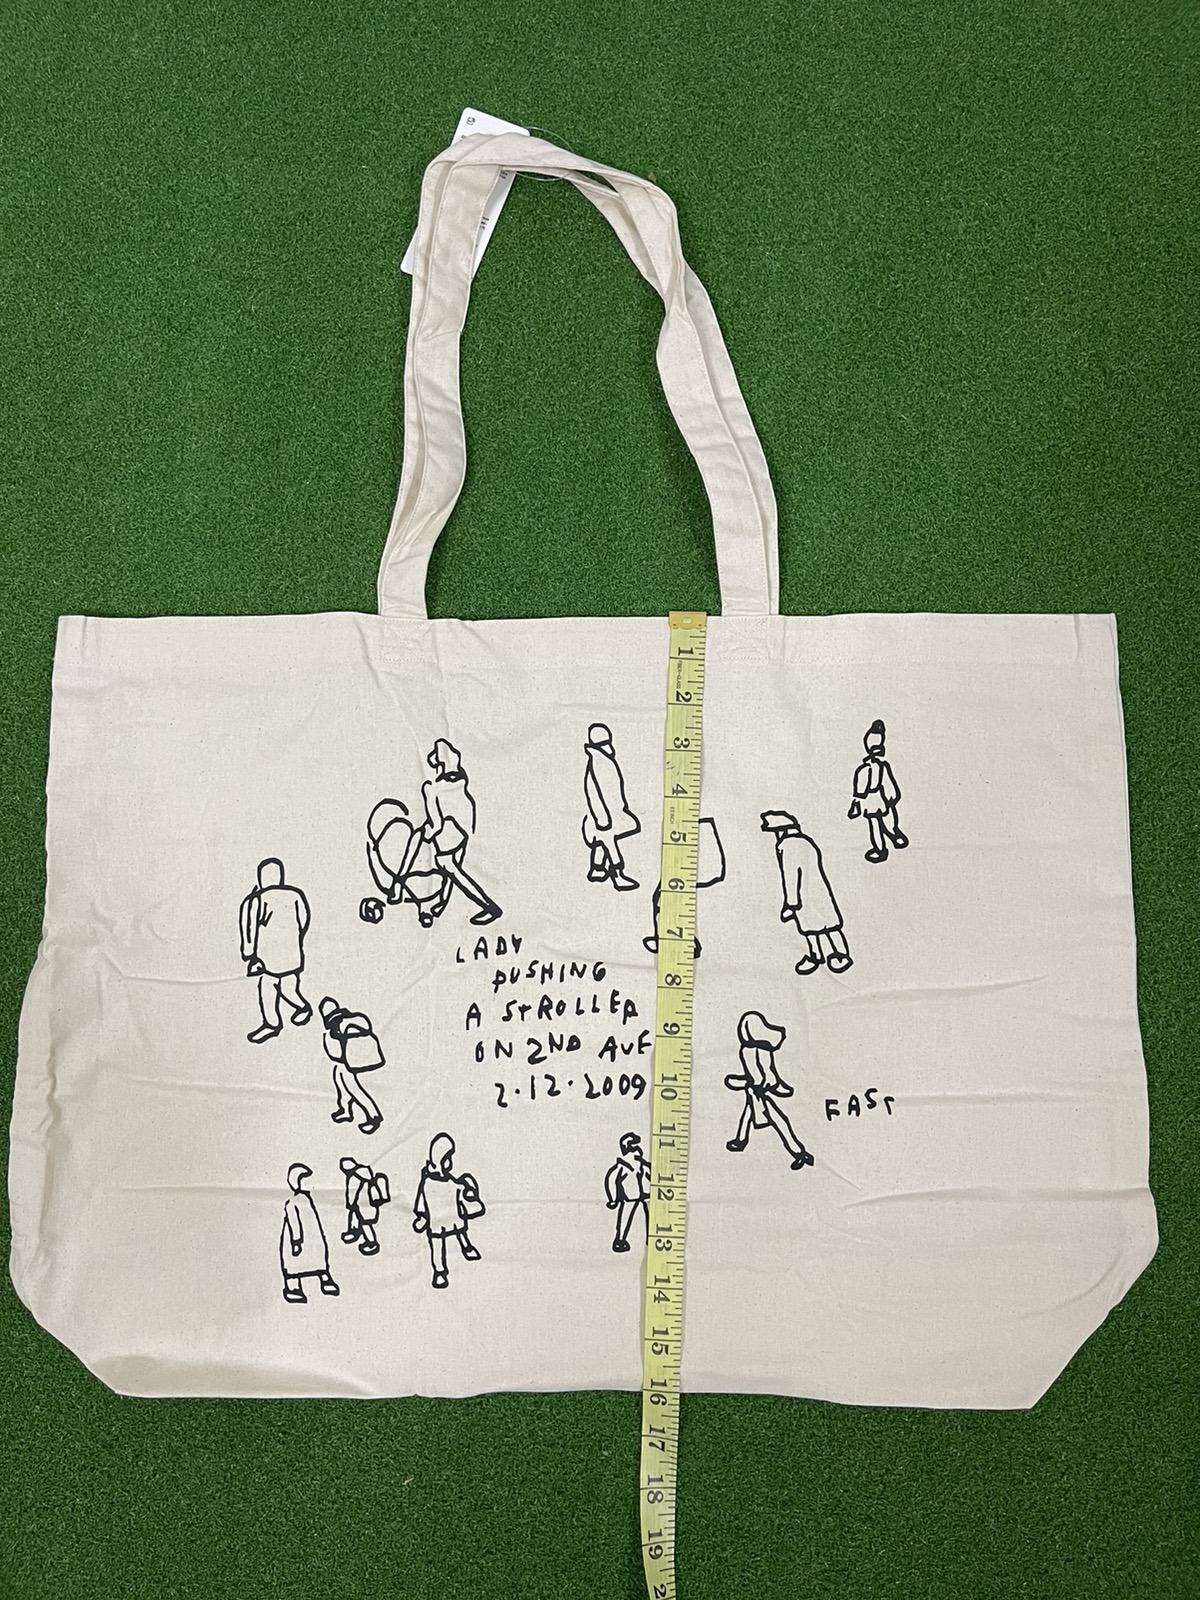 Outdoor Style Go Out! - New Jason Polan Tote Bag Limited Edition / Uniqlo / Eva - 12